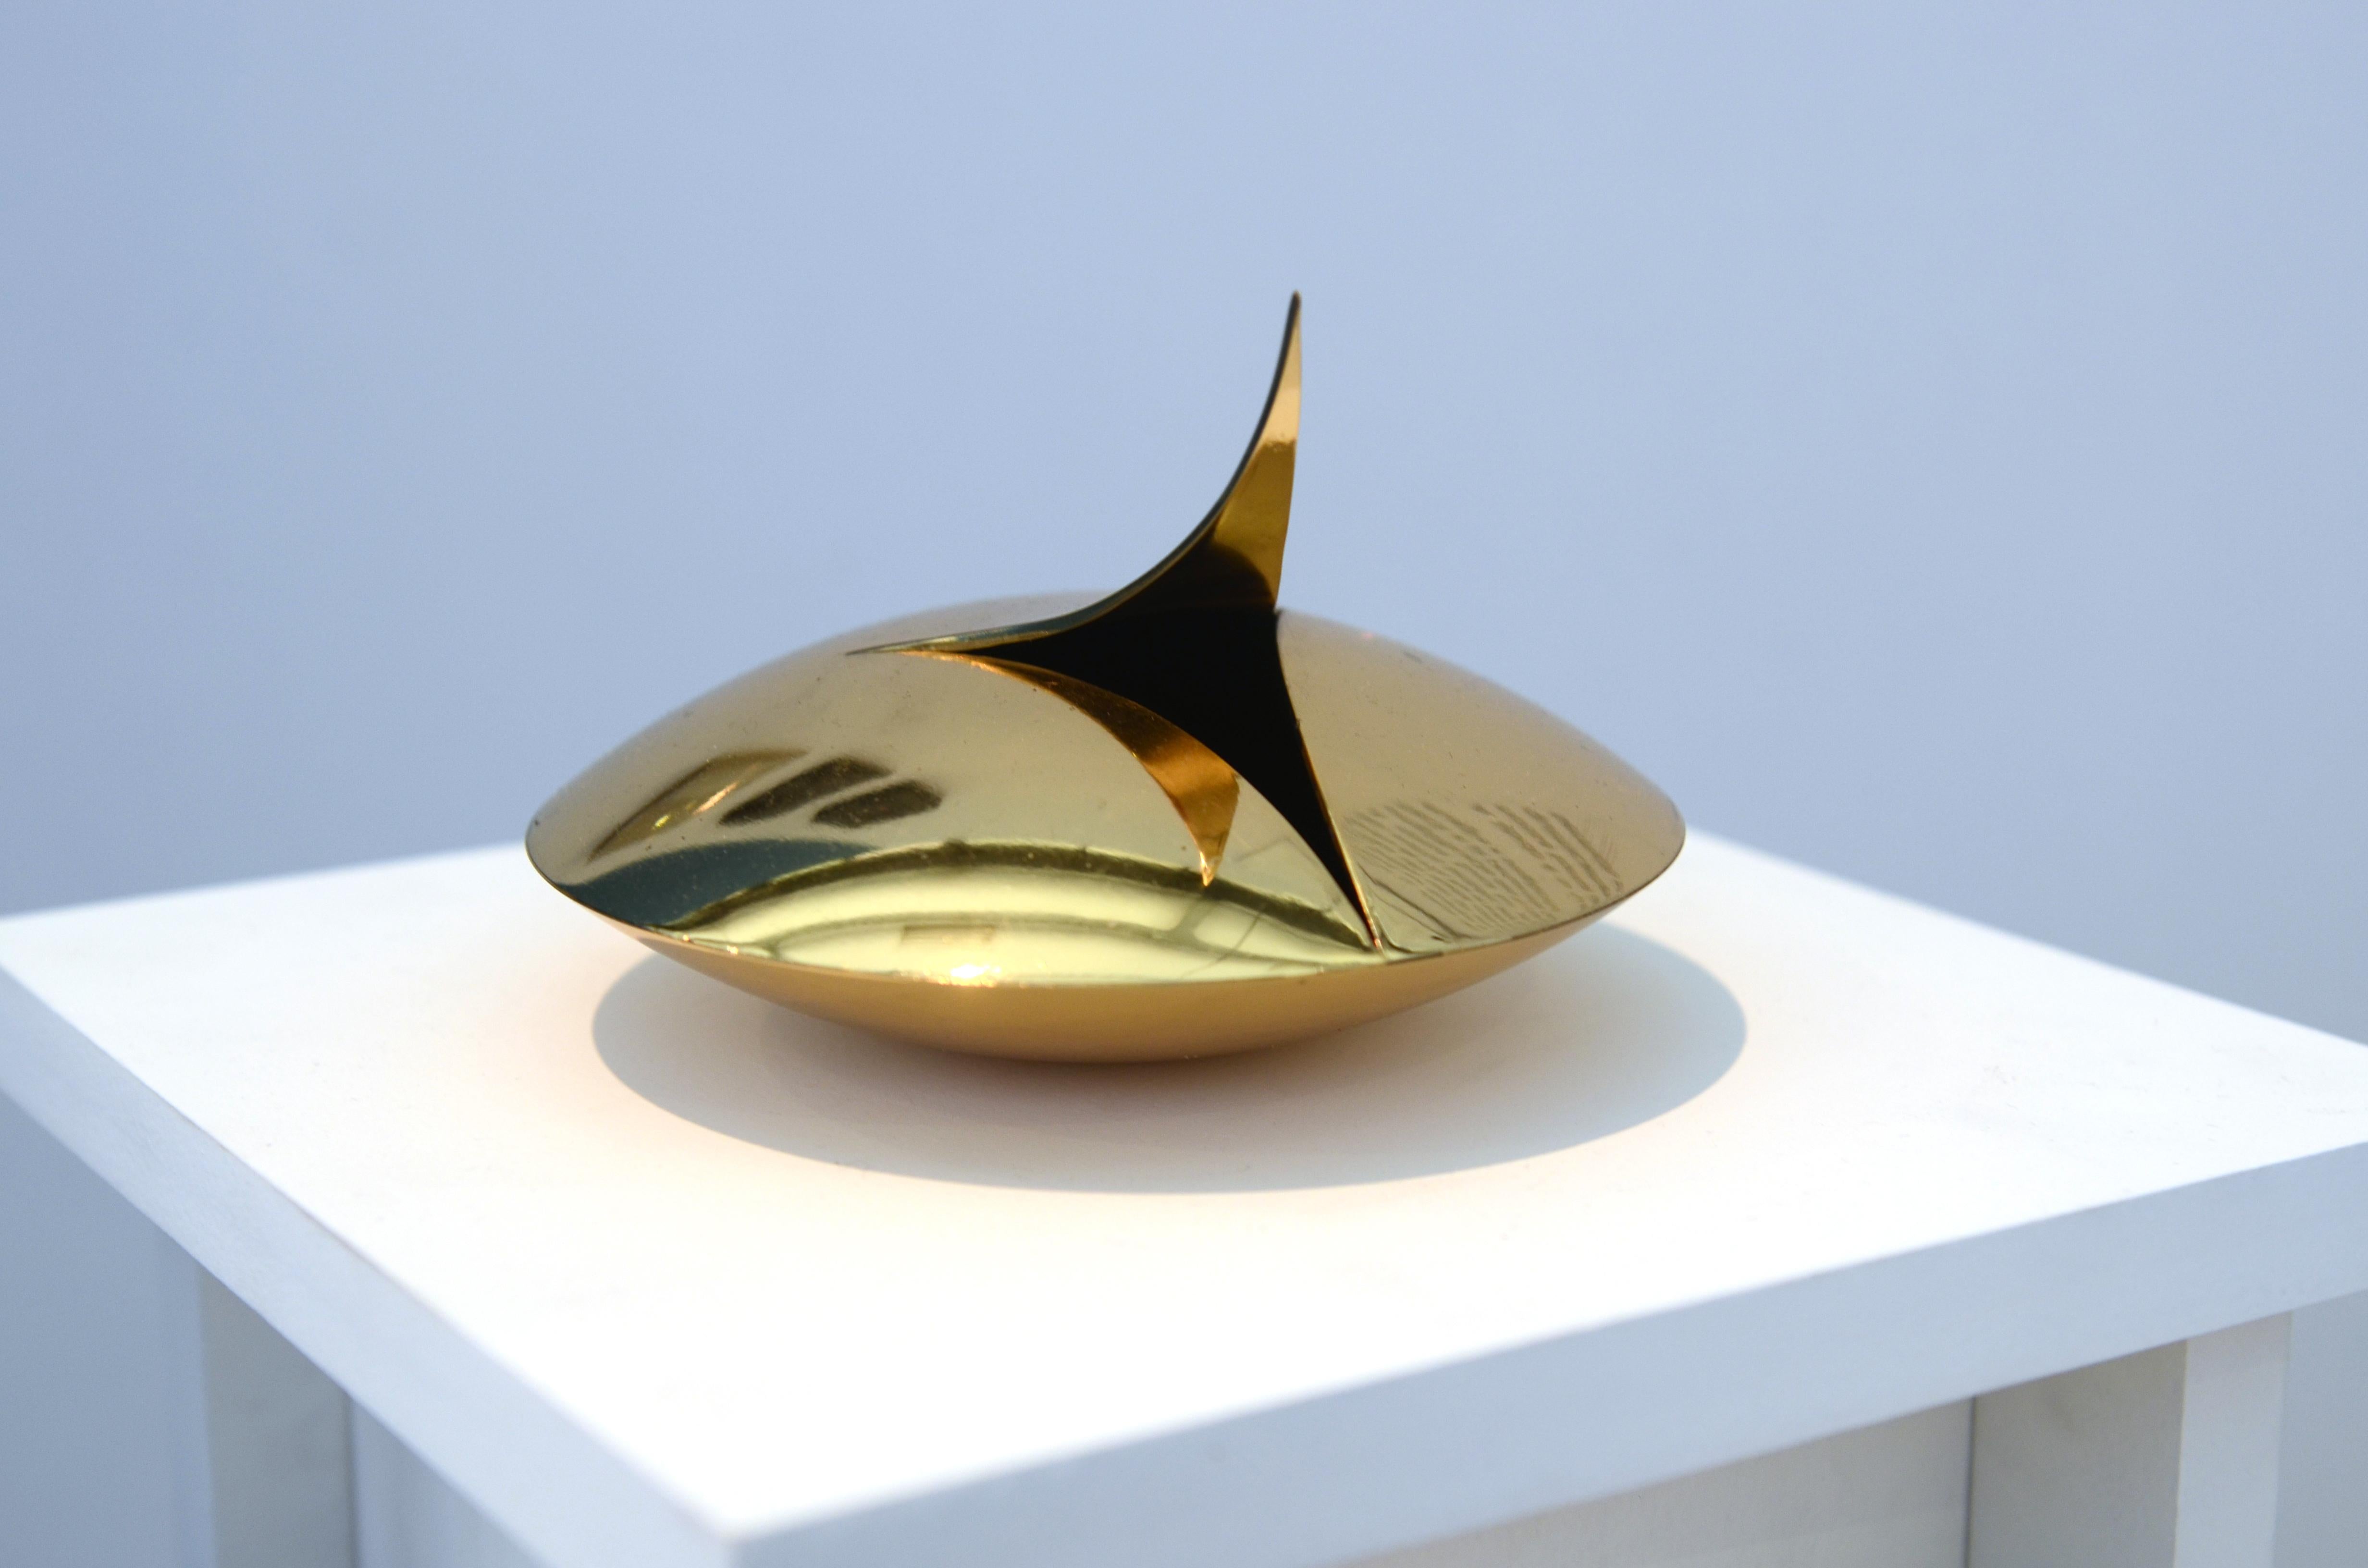 Libidonoso object #2 by Mameluca
Material: gold-plated metal
Dimensions: D 15 x H 10cm

In reference to Paul Nacke’s states about Narcissism, being an attitude of a person who treats his own body in the same way as the body of a sexual object is